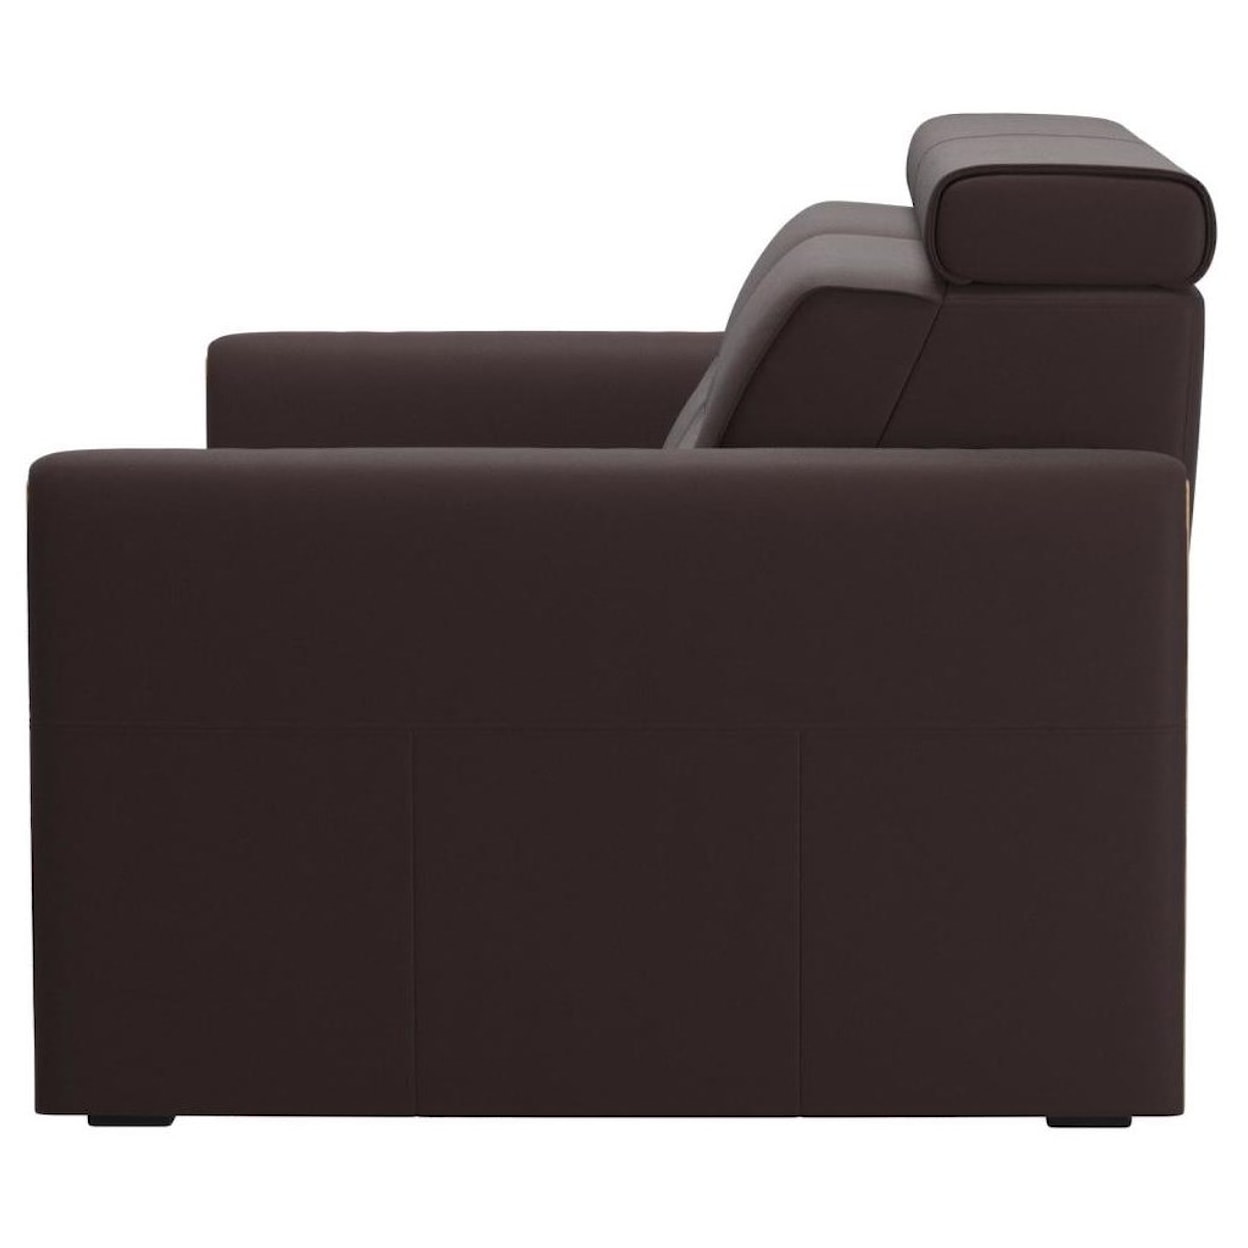 Stressless Emily Power 2-Seat Sofa with Wood Arms